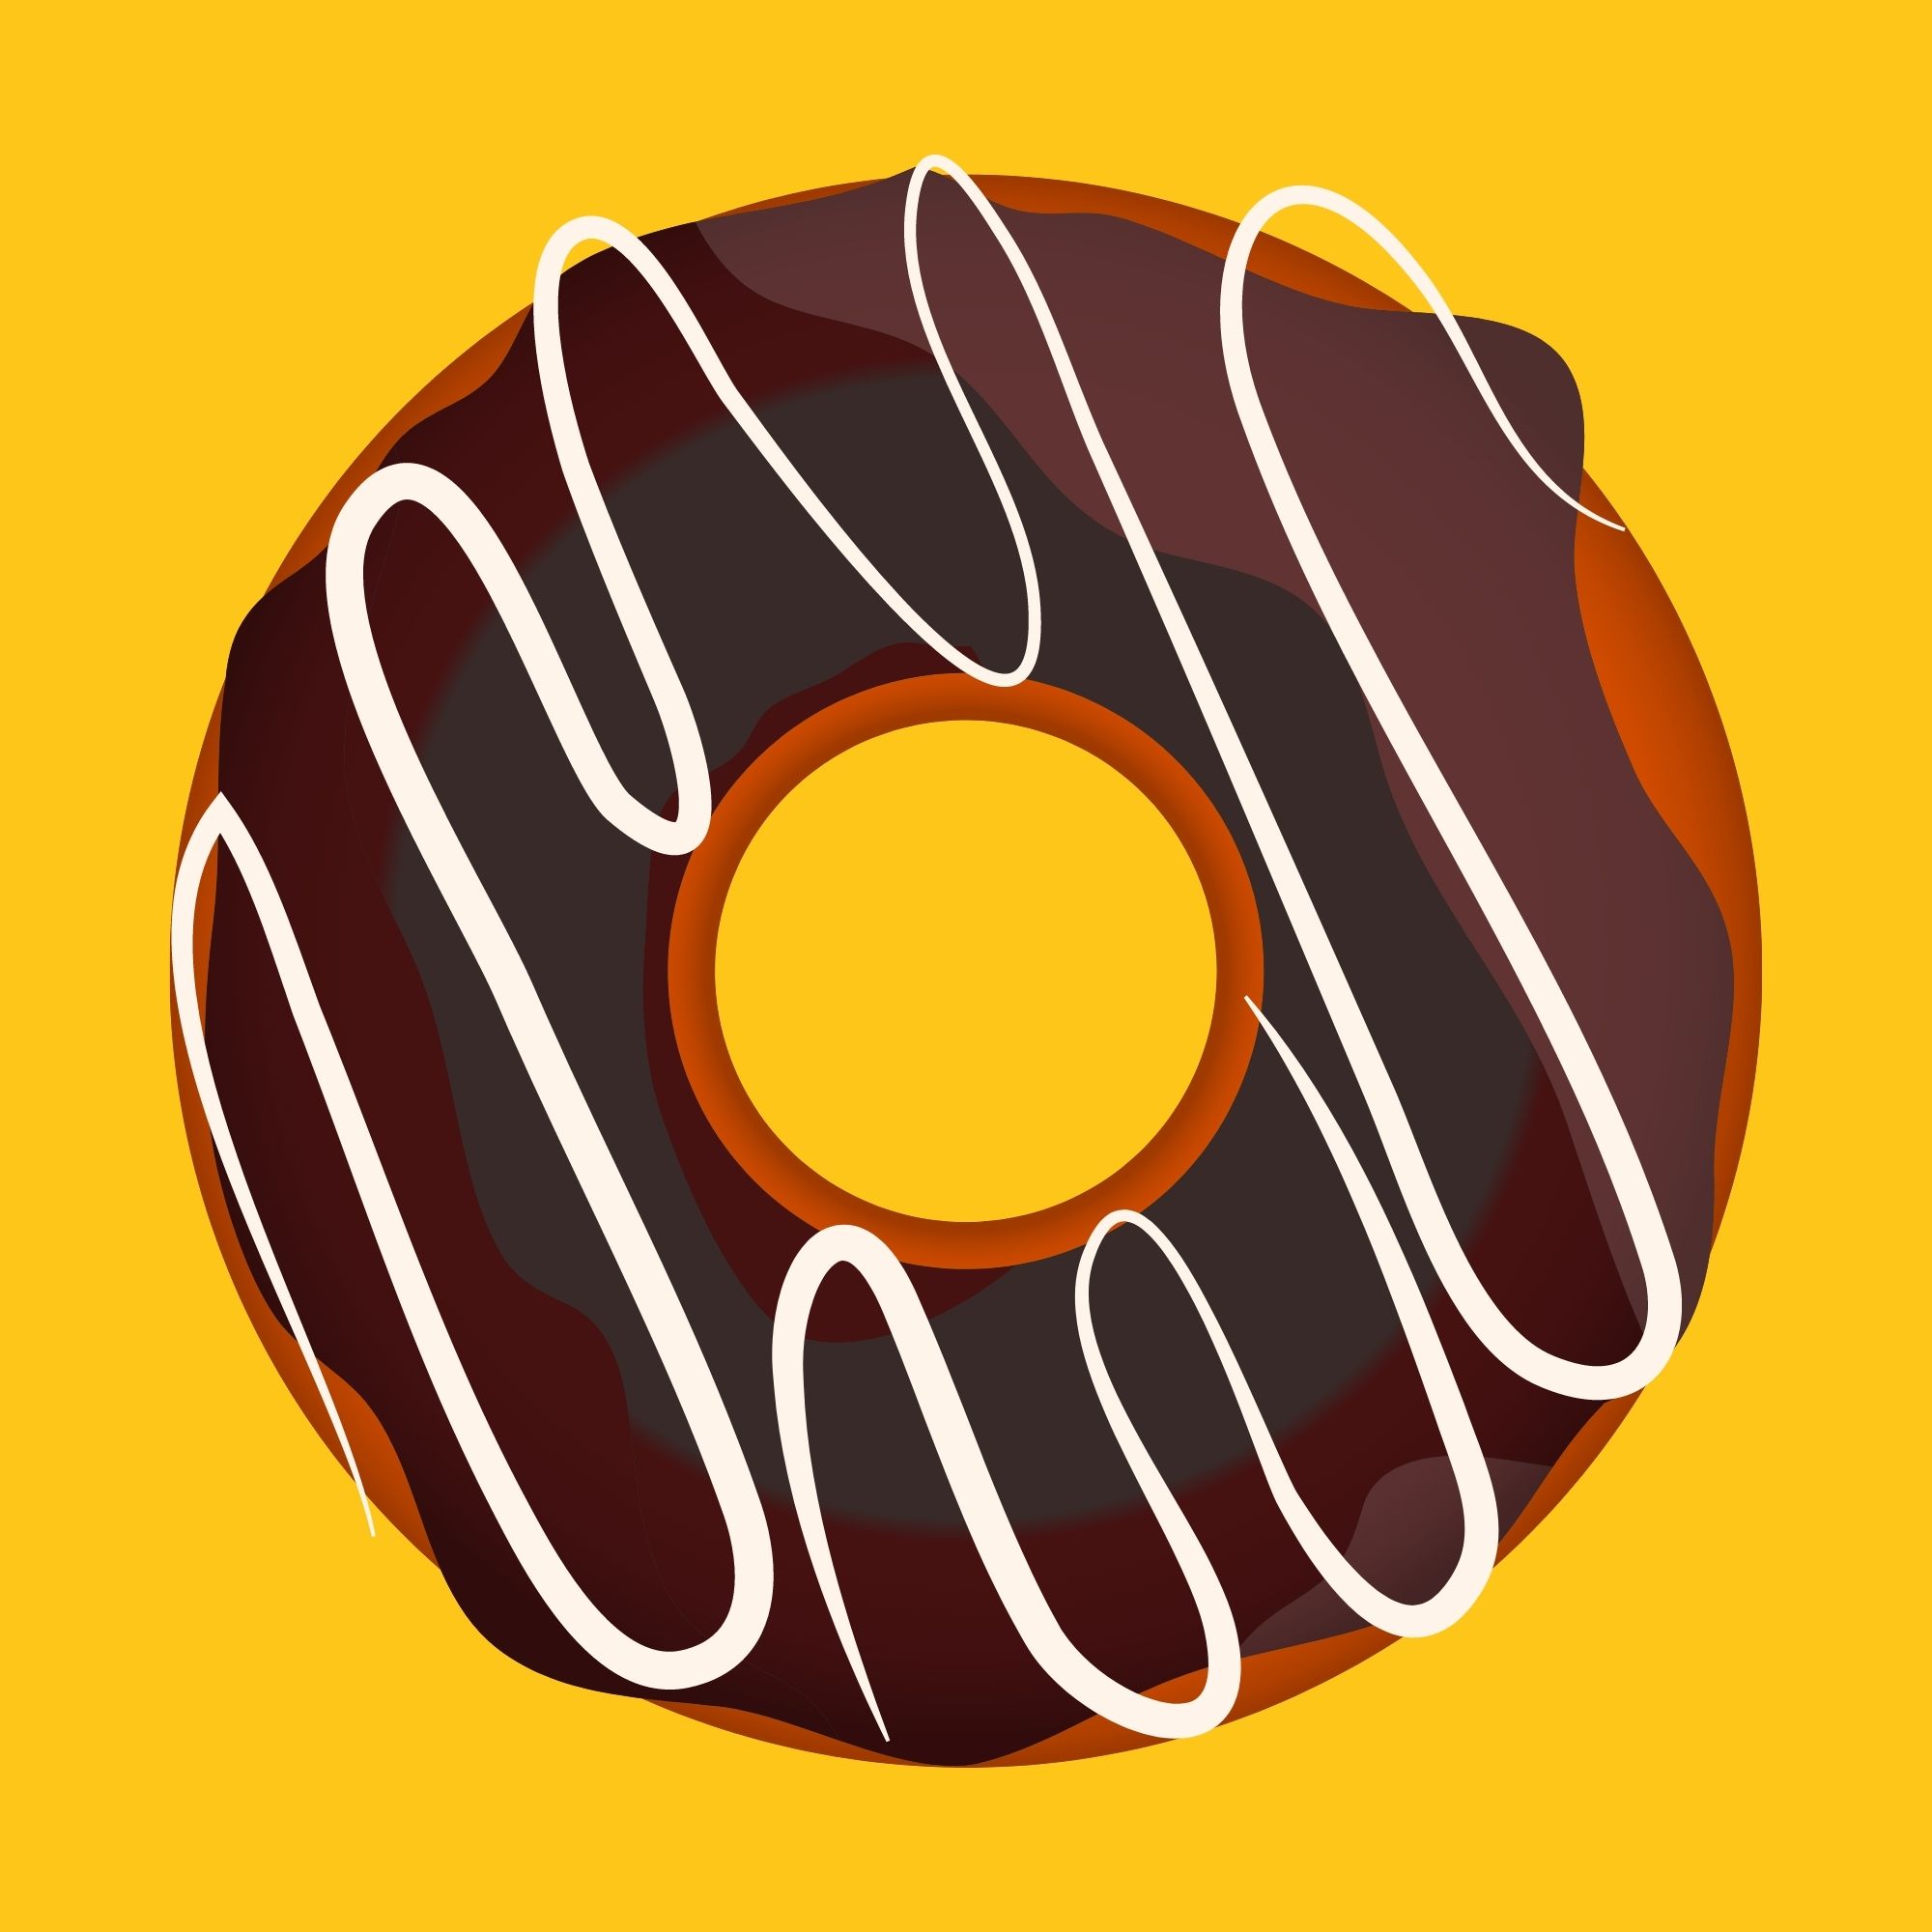 Donut #62 - Poly Donuts